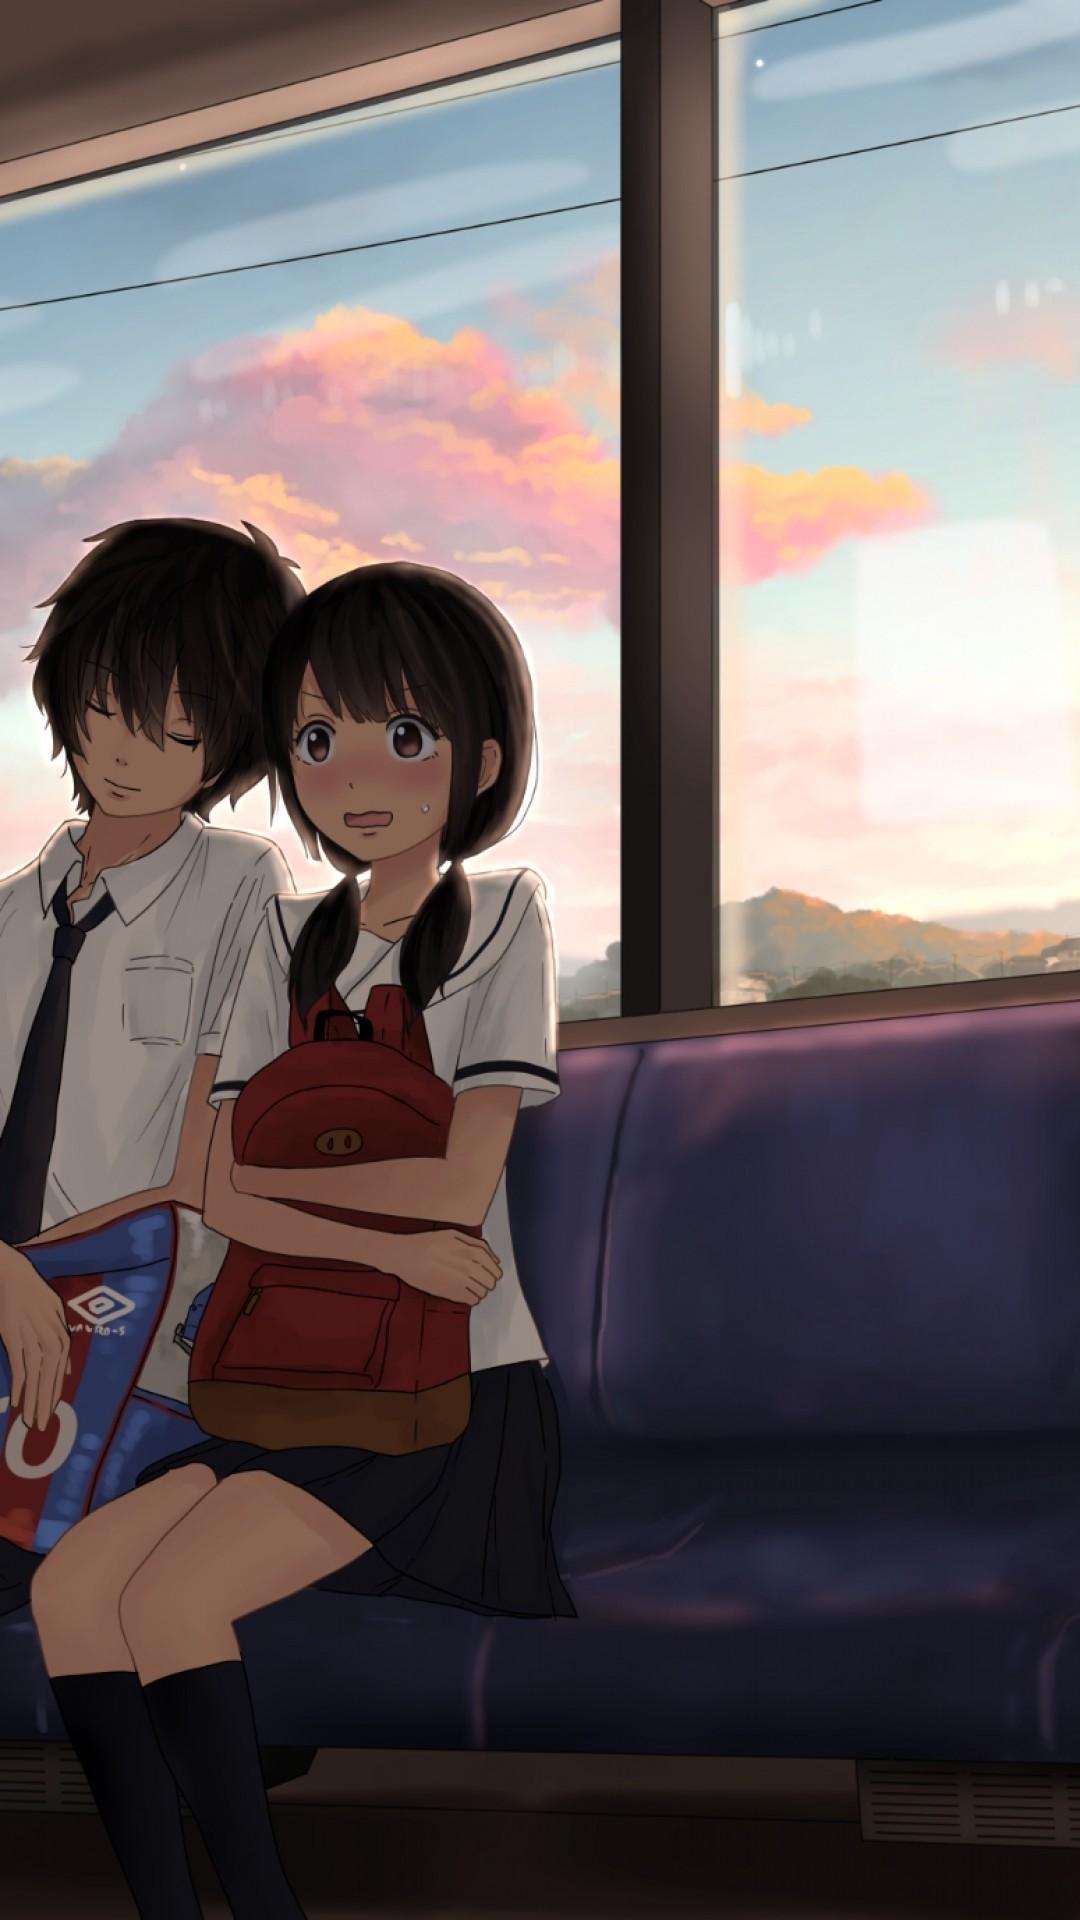 Download Anime Couple Wallpapers Free for Android  Anime Couple Wallpapers  APK Download  STEPrimocom